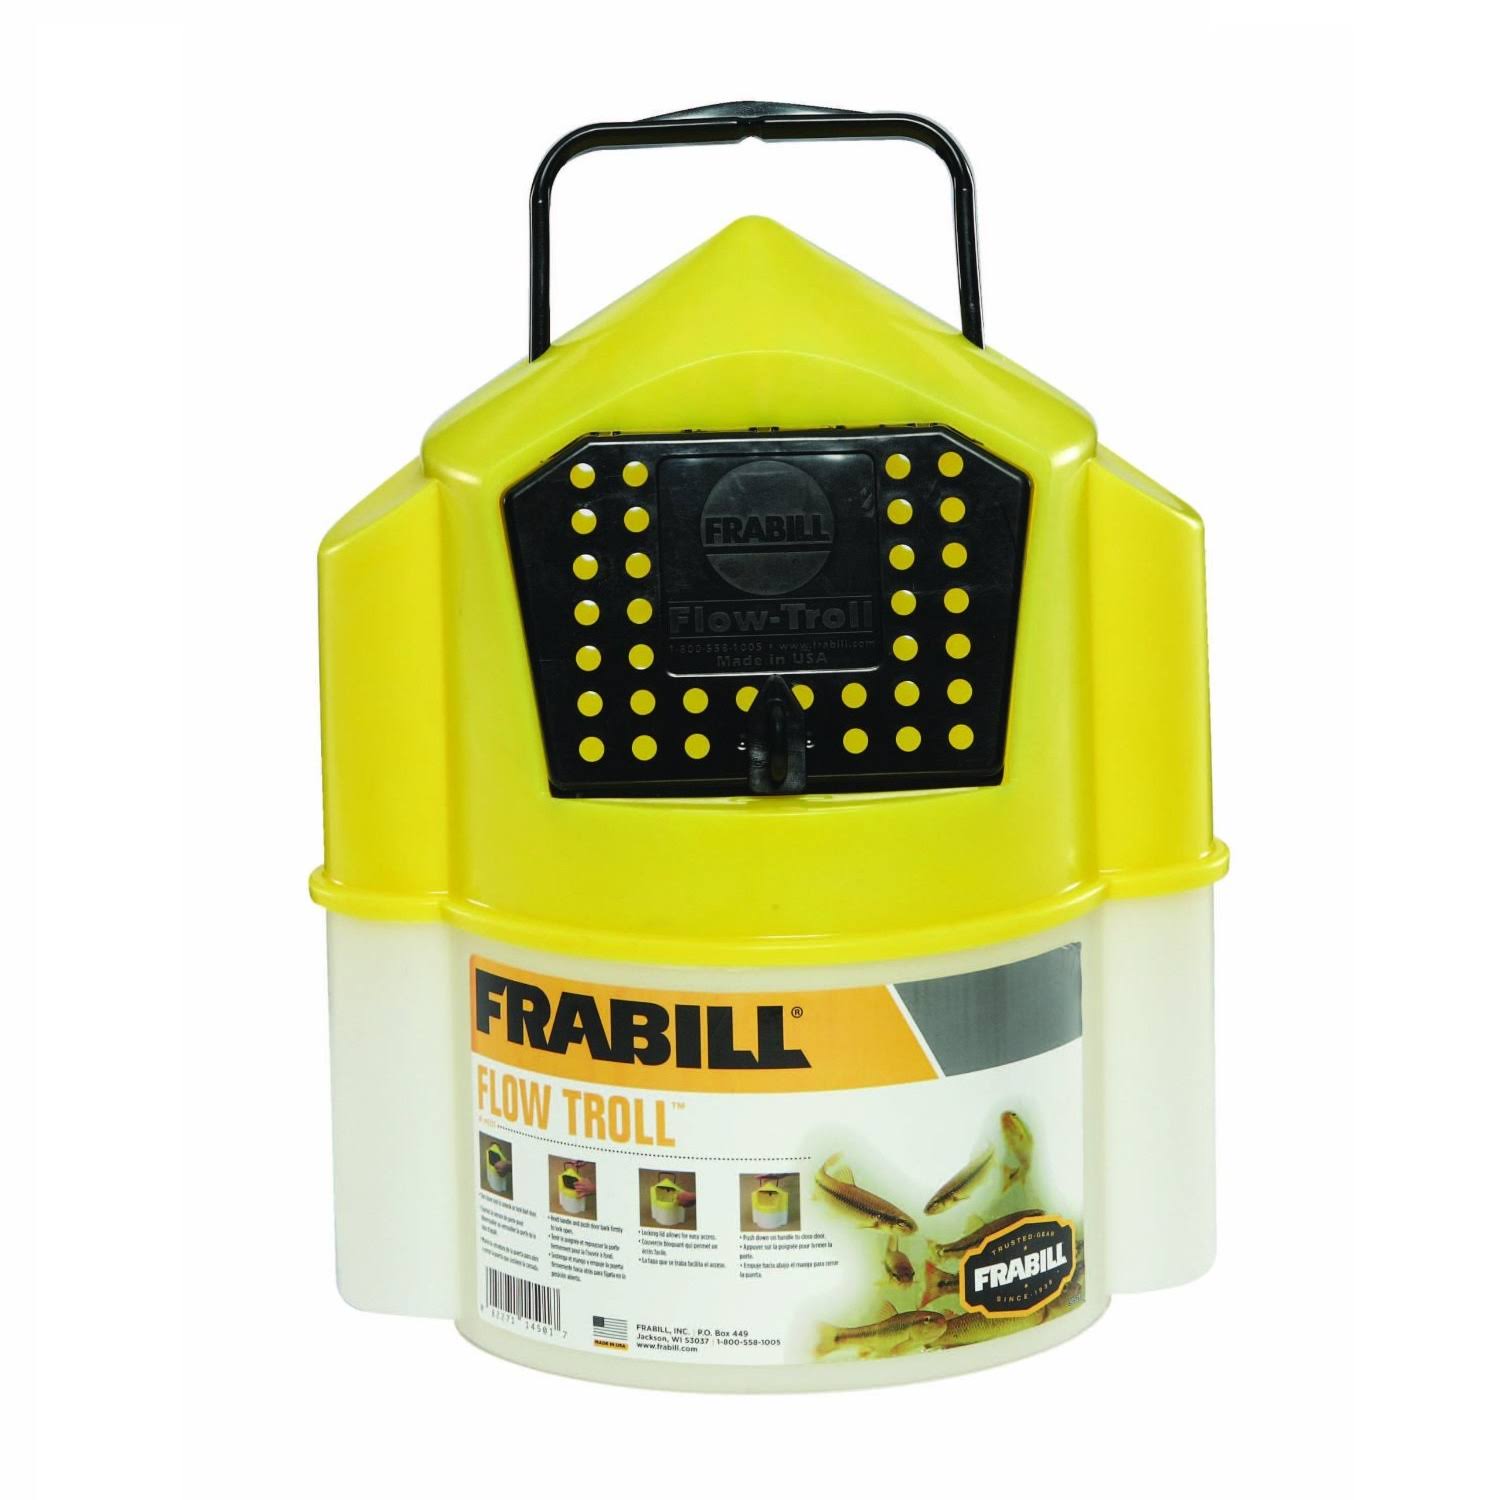 Frabill Flow Troll Bait Container - Yellow/White, 6qt